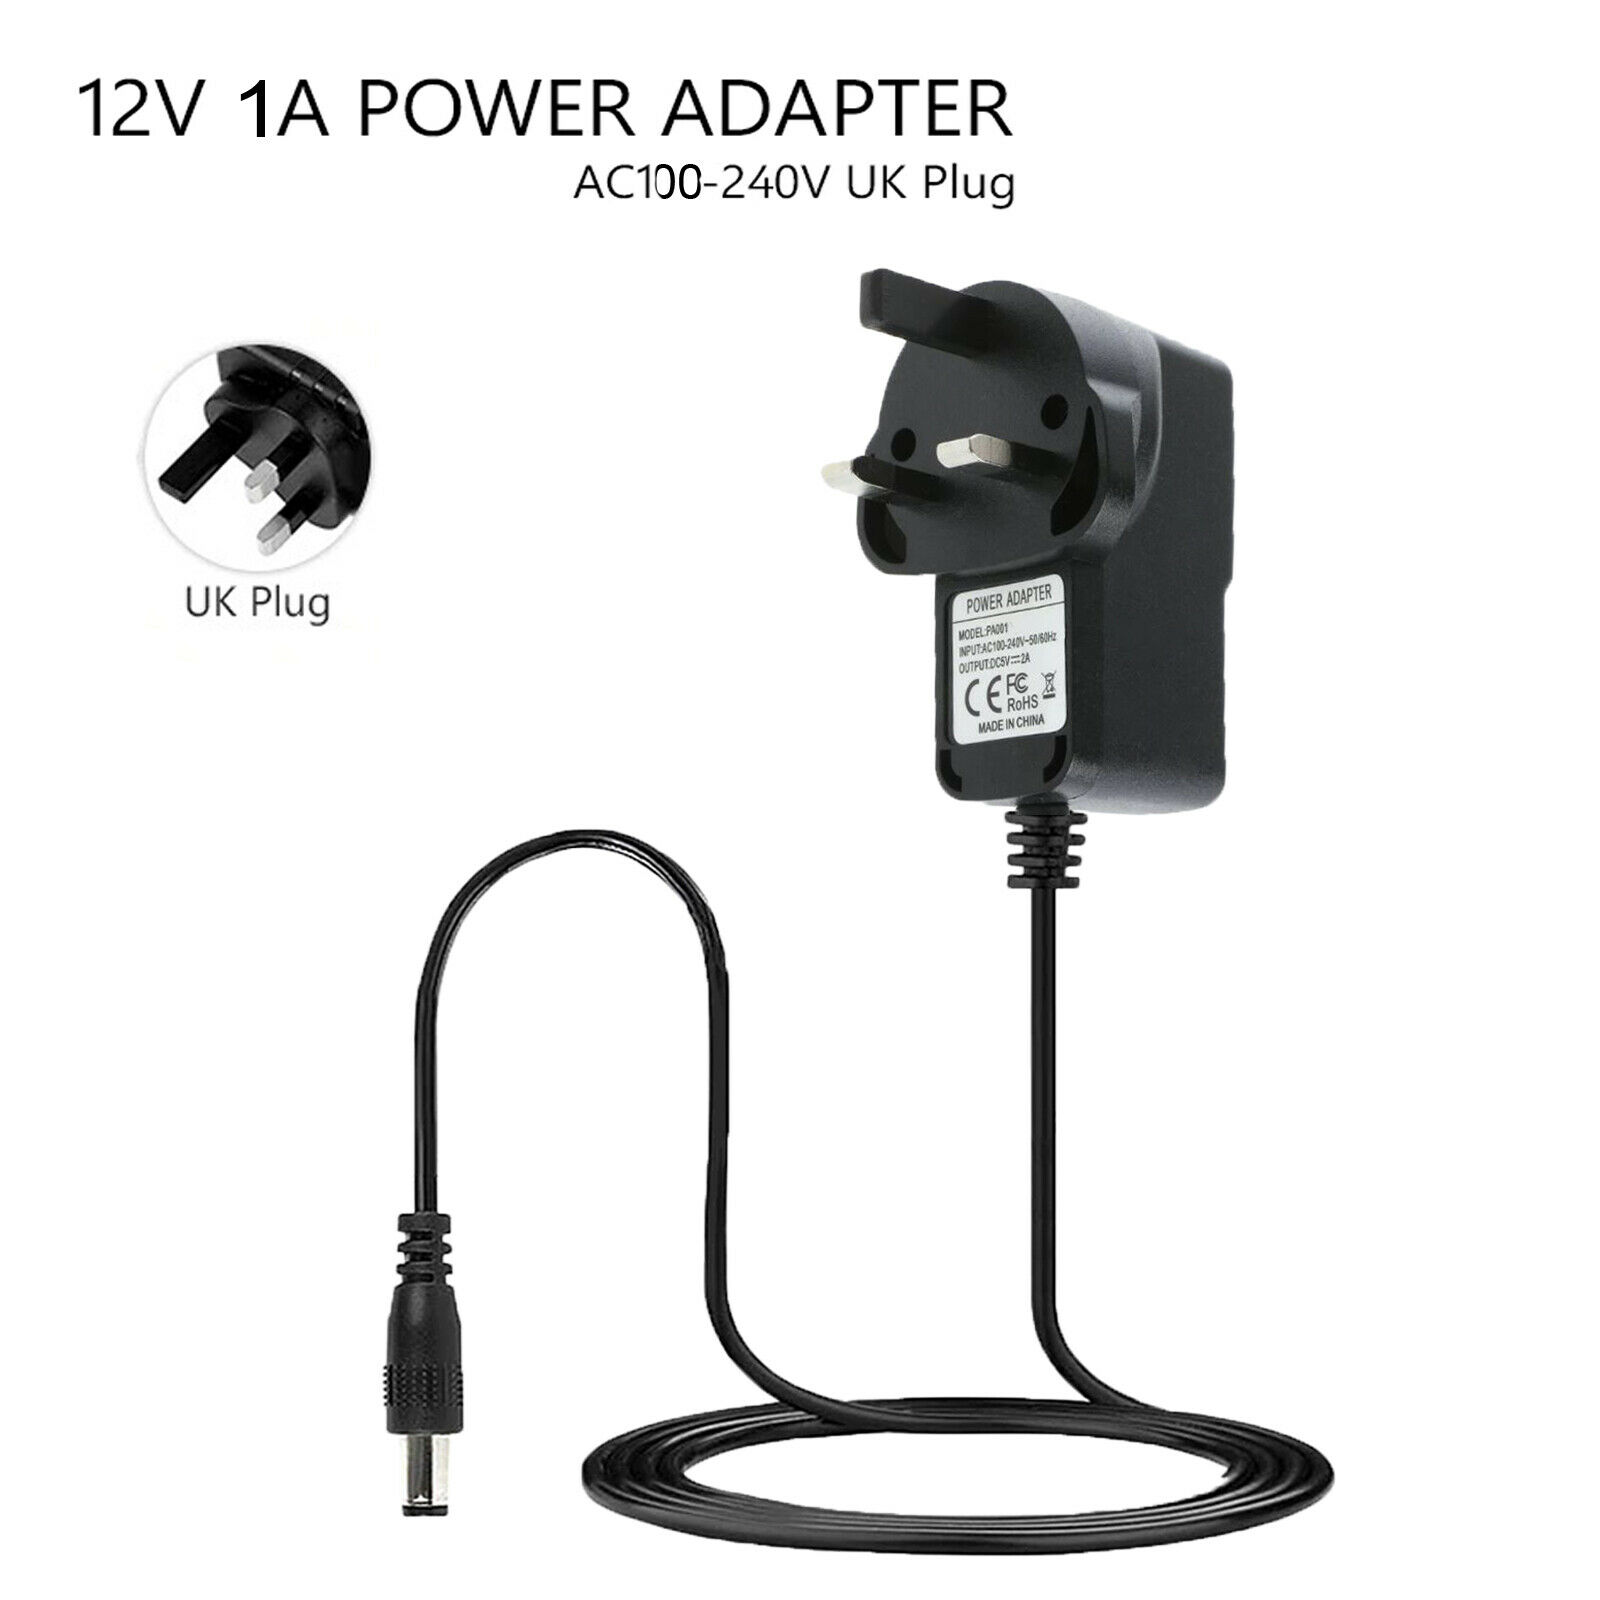 12V 1A DC PSU Charger Power Supply Adapter for CCTV Camera LED Strip UK Plug Connector A: Male Connection Split/Dup - Click Image to Close